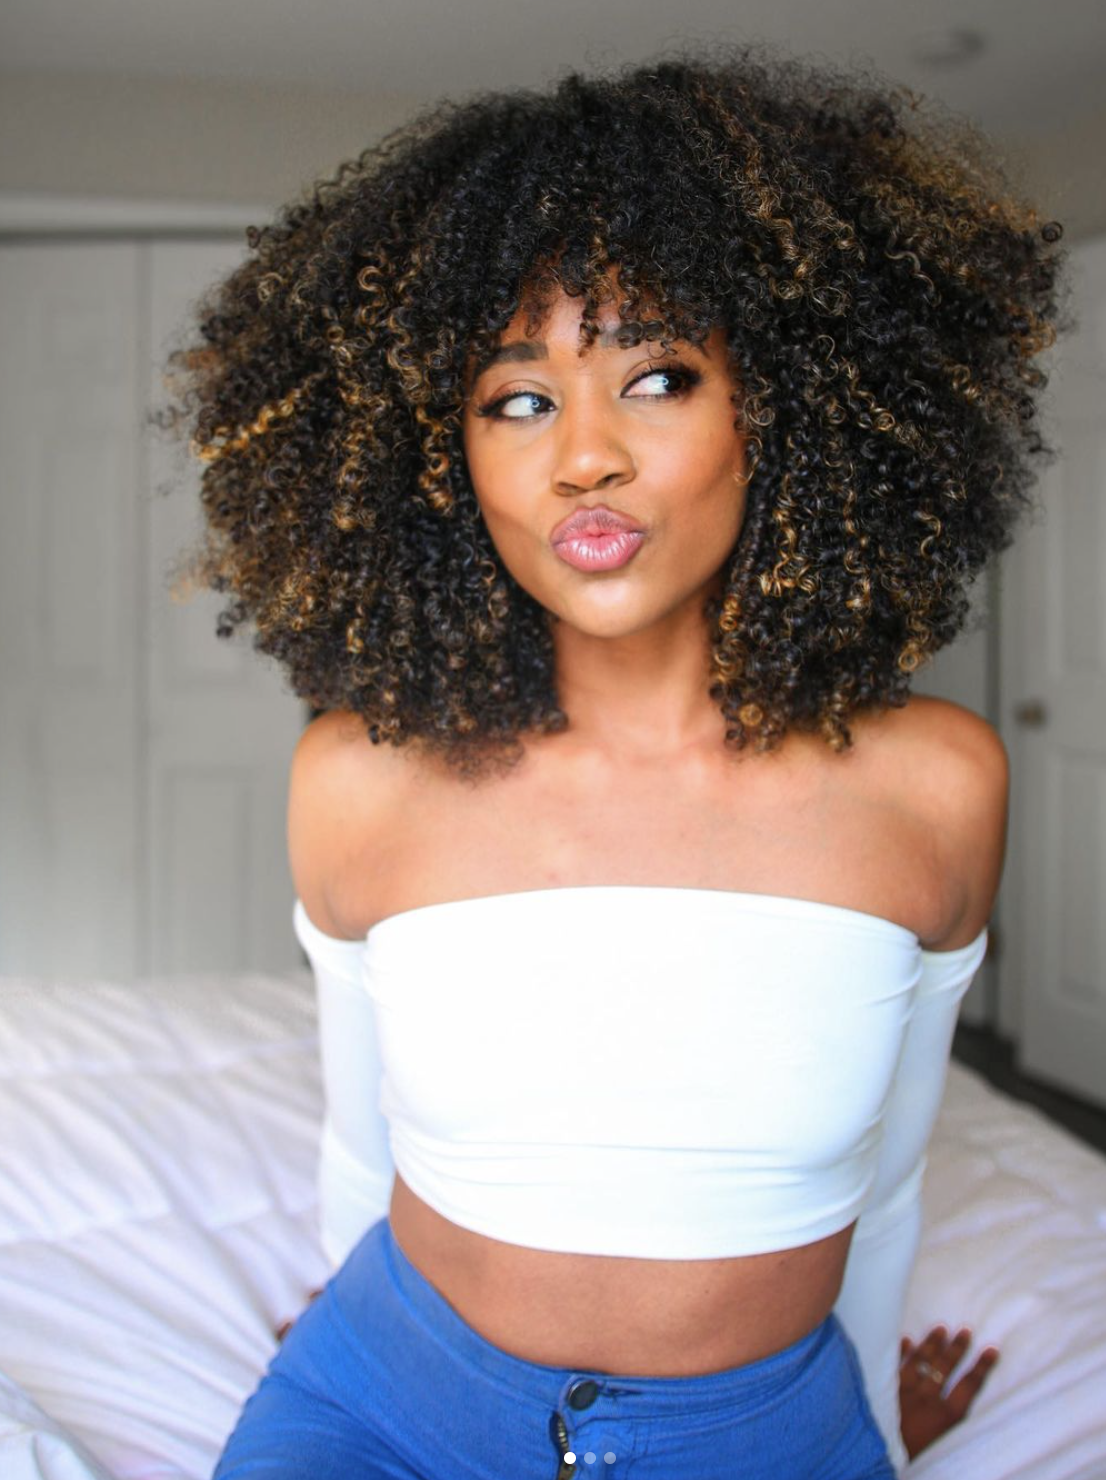 71 Sassy Short Curly Hairstyles To Wear At Any Age! | Short curly haircuts,  Chin length hair, Curly hair styles